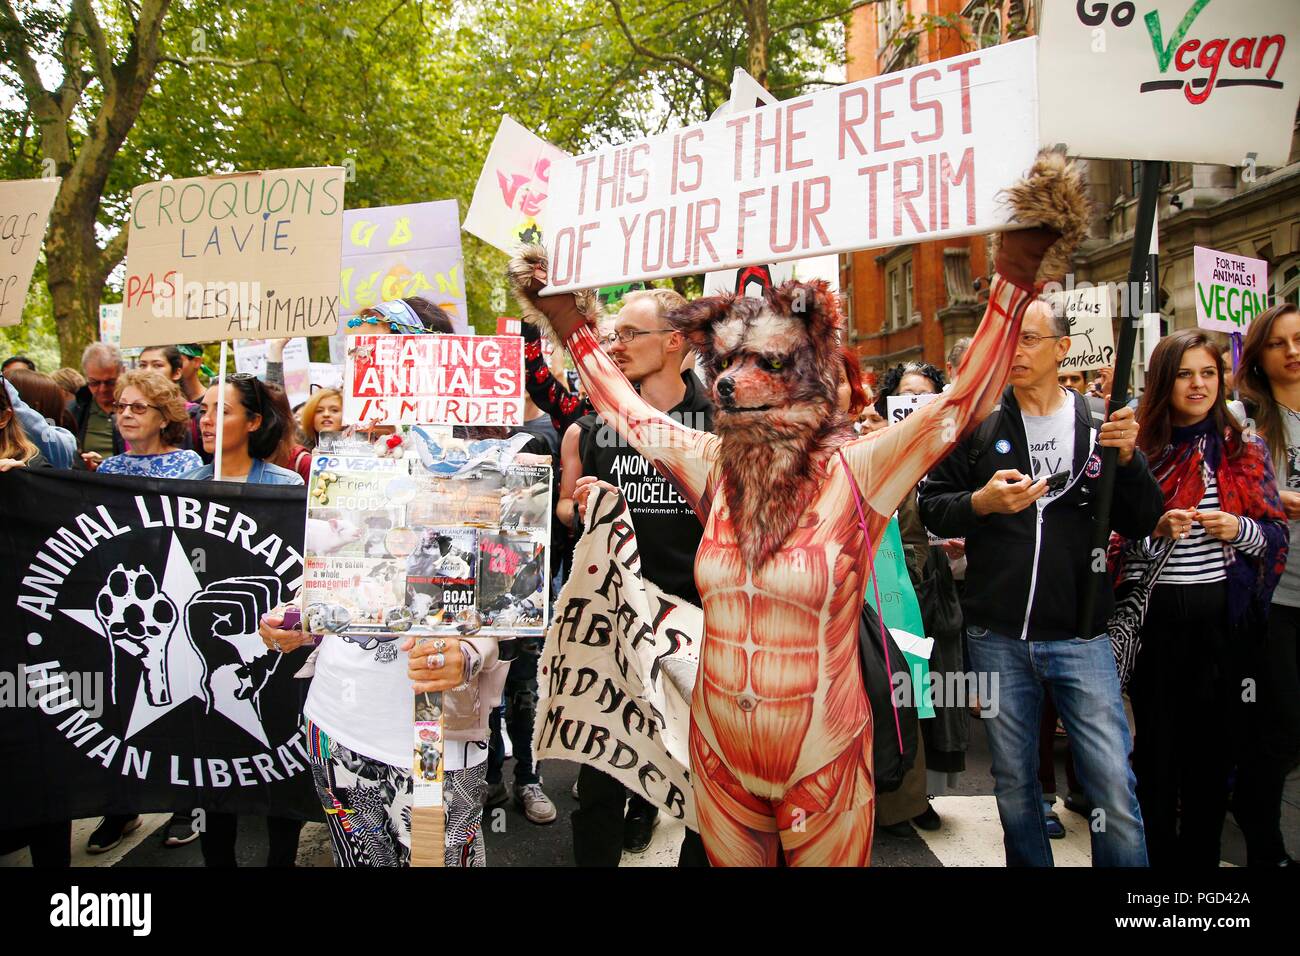 London, UK. 25th Aug 2018. Approximately ten thousand people marched from Millbank in central London to Hyde Park this afternoon, to protest against the cruelty to animals in the food chain and to promote veganism, the march was peaceful but noisy and vibrant. Credit: Natasha Quarmby/Alamy Live News Stock Photo